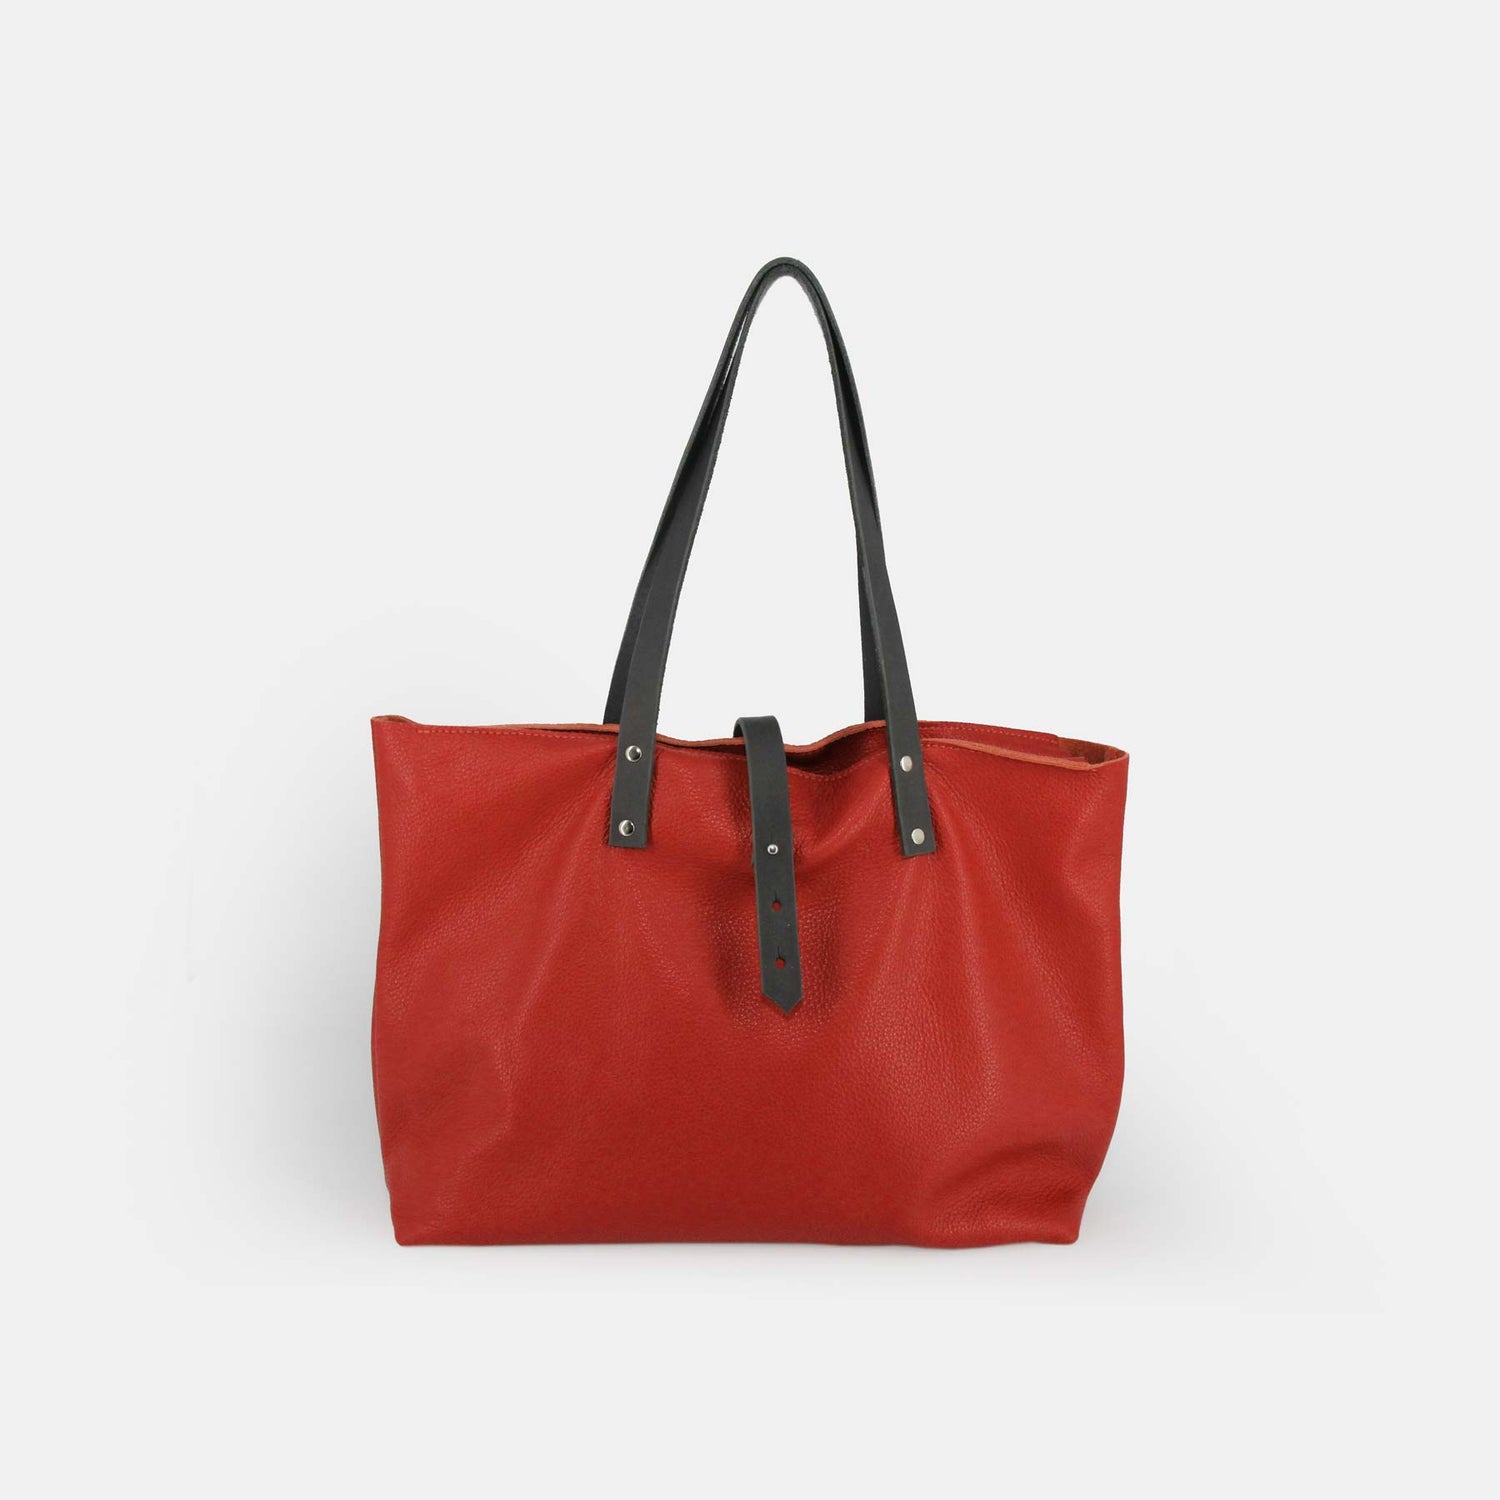 Soft Italian Leather Tote with Zip - Red - RYAN London